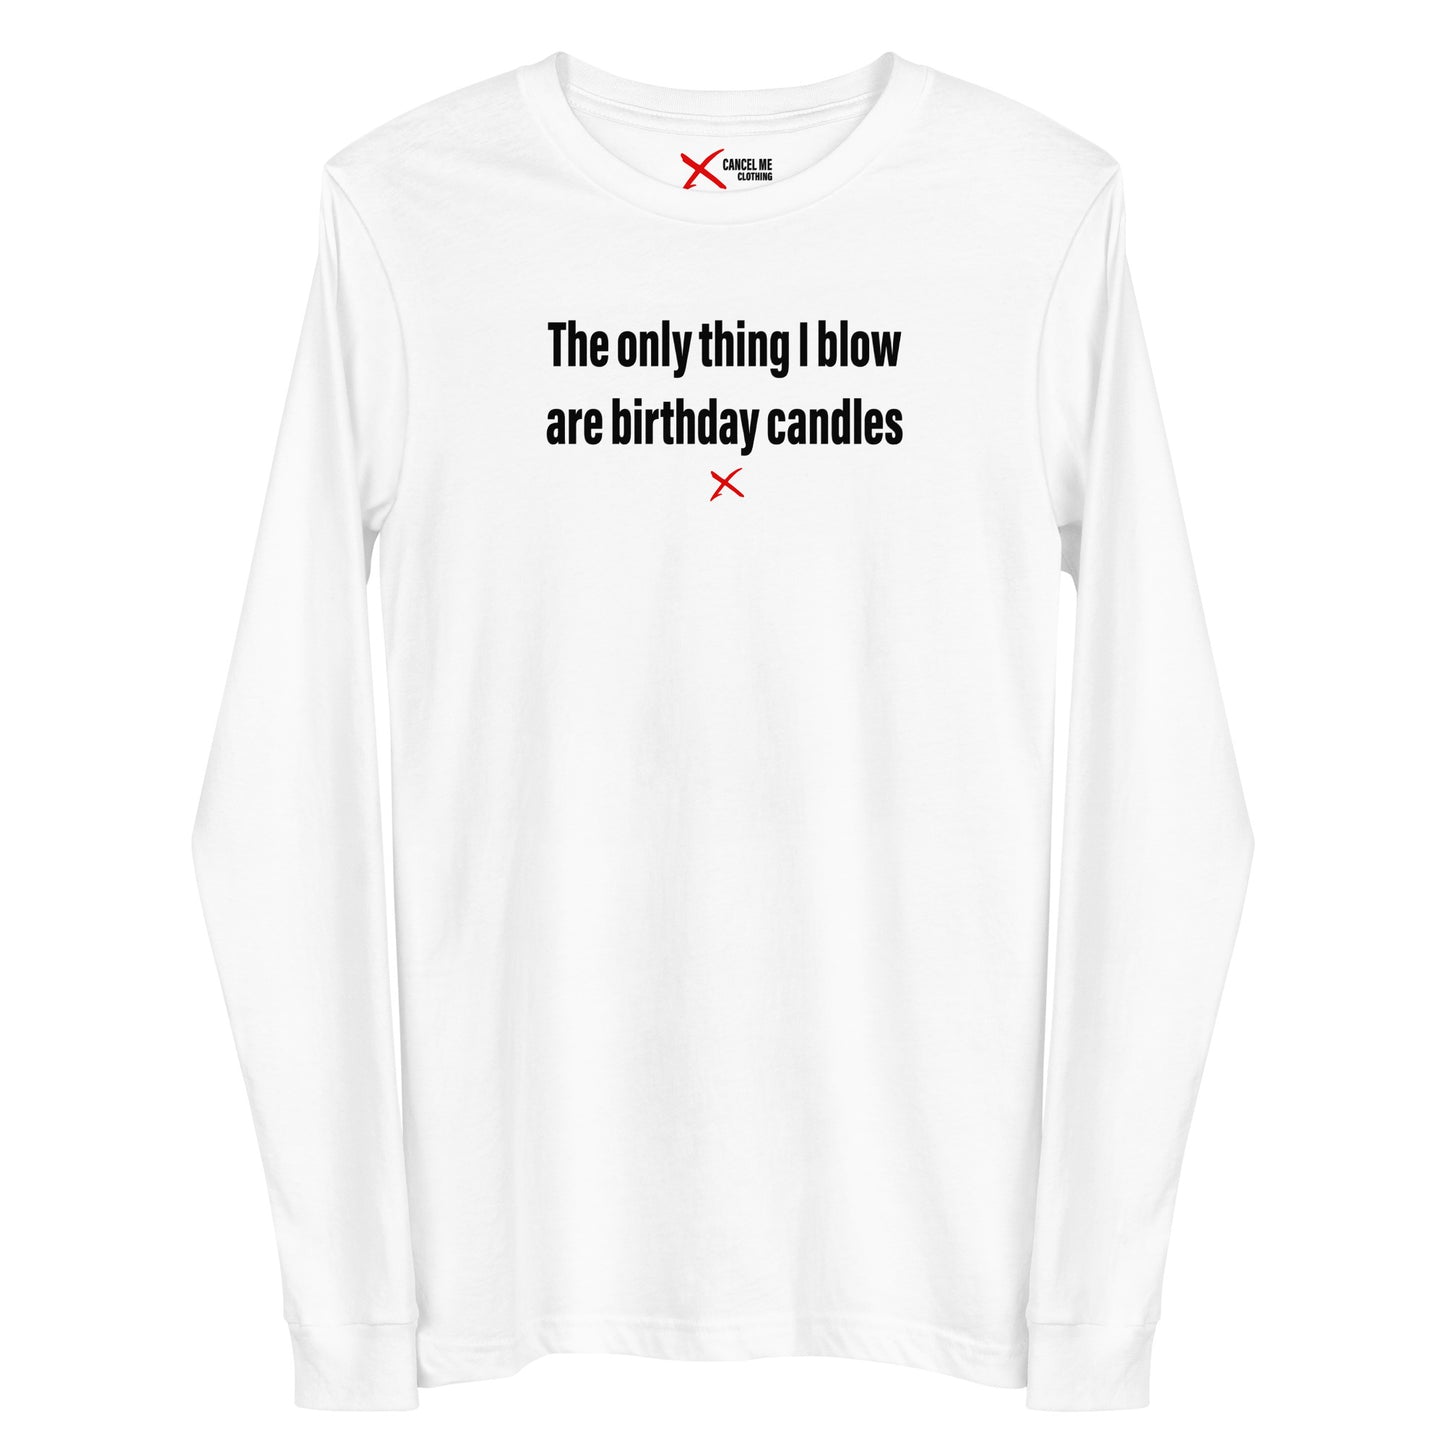 The only thing I blow are birthday candles - Longsleeve